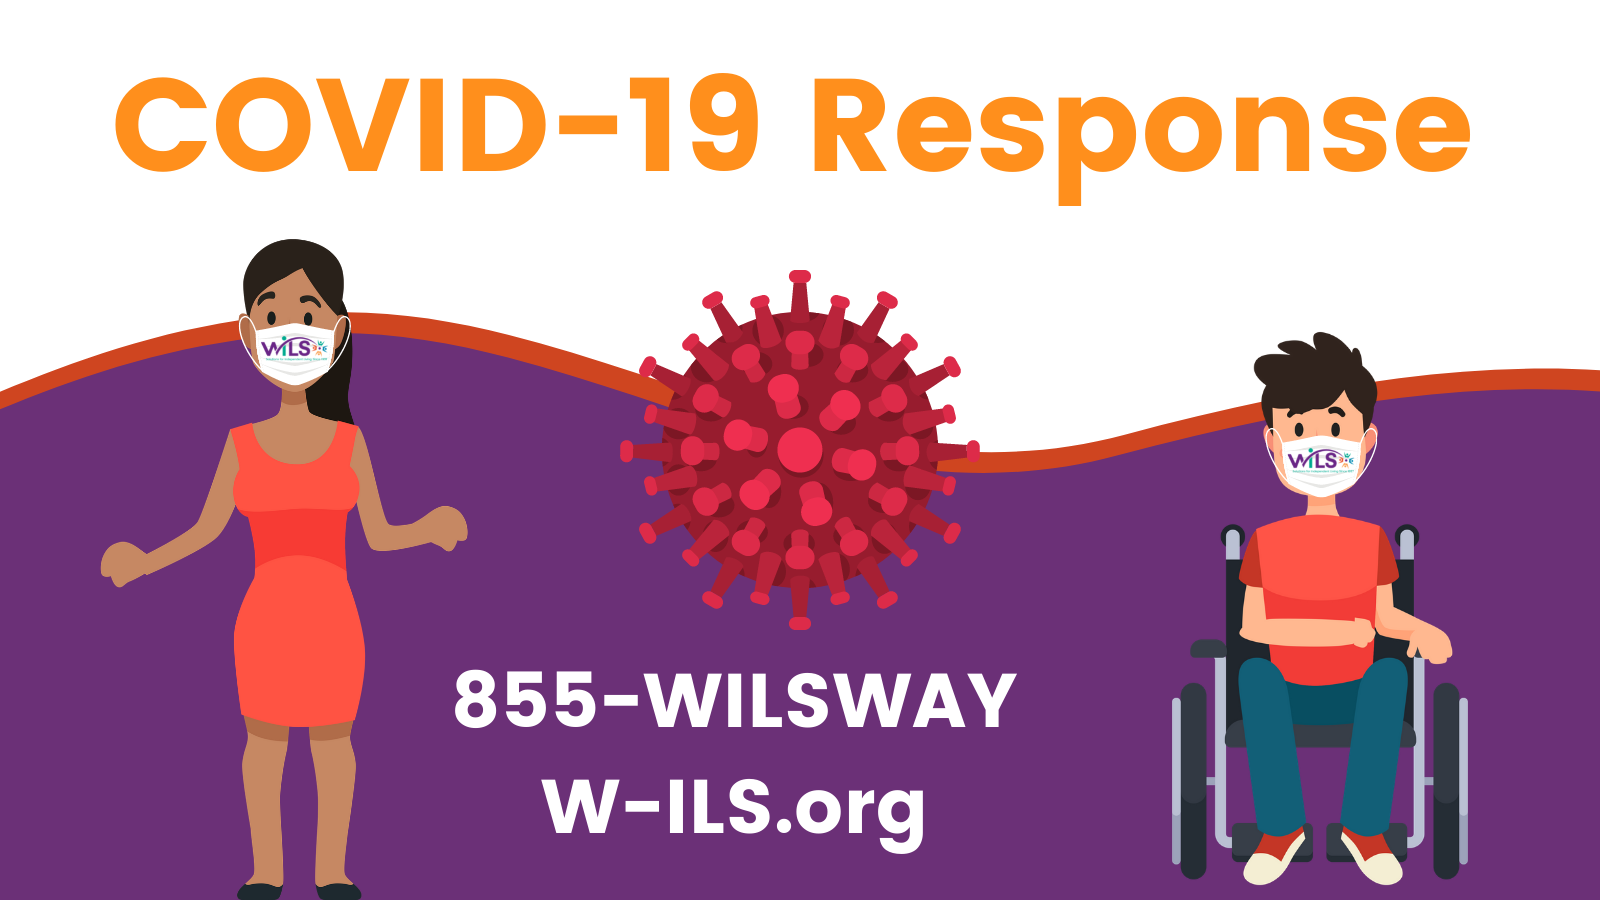 For more information about WILS COVID-19 Response, call 855-945-7929 or visit W-ILS.org